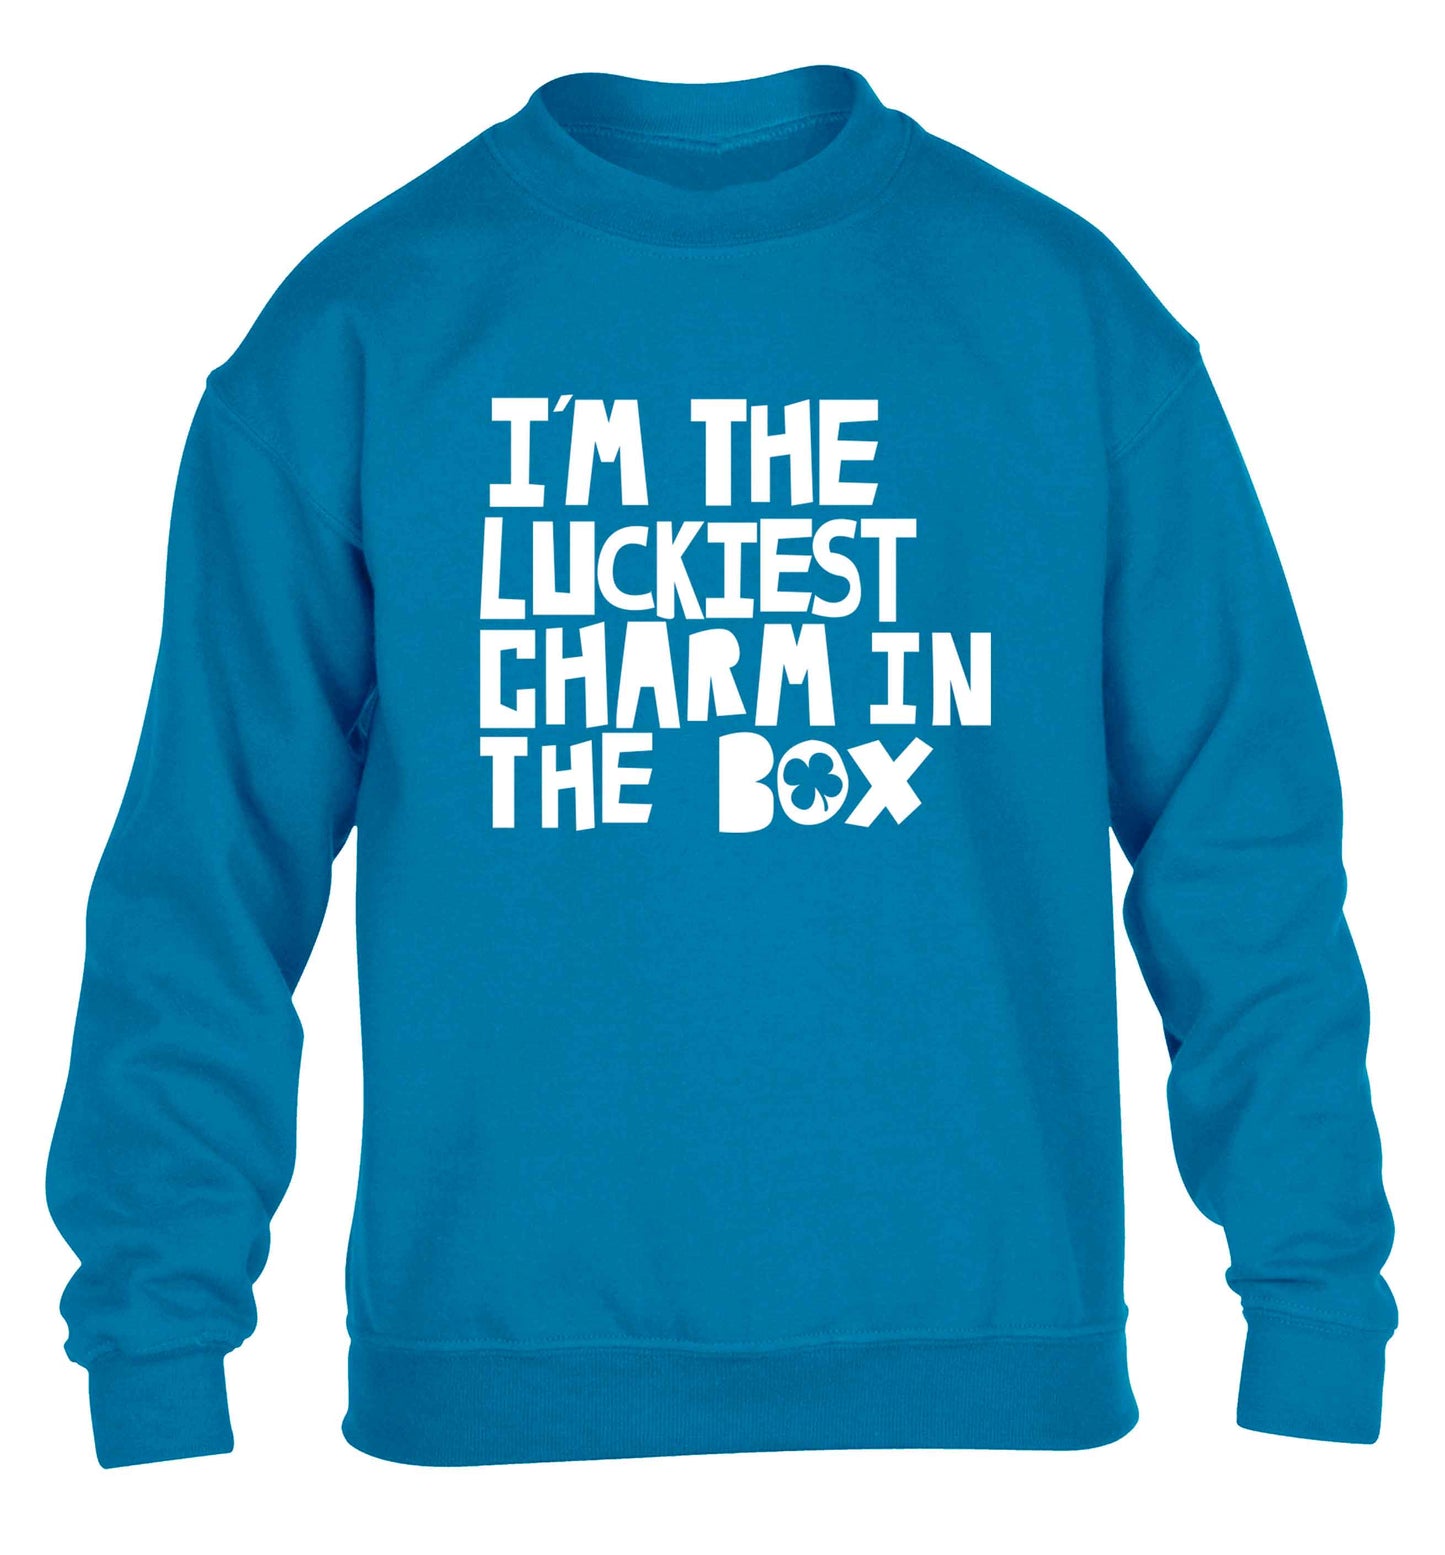 I'm the luckiest charm in the box children's blue sweater 12-13 Years